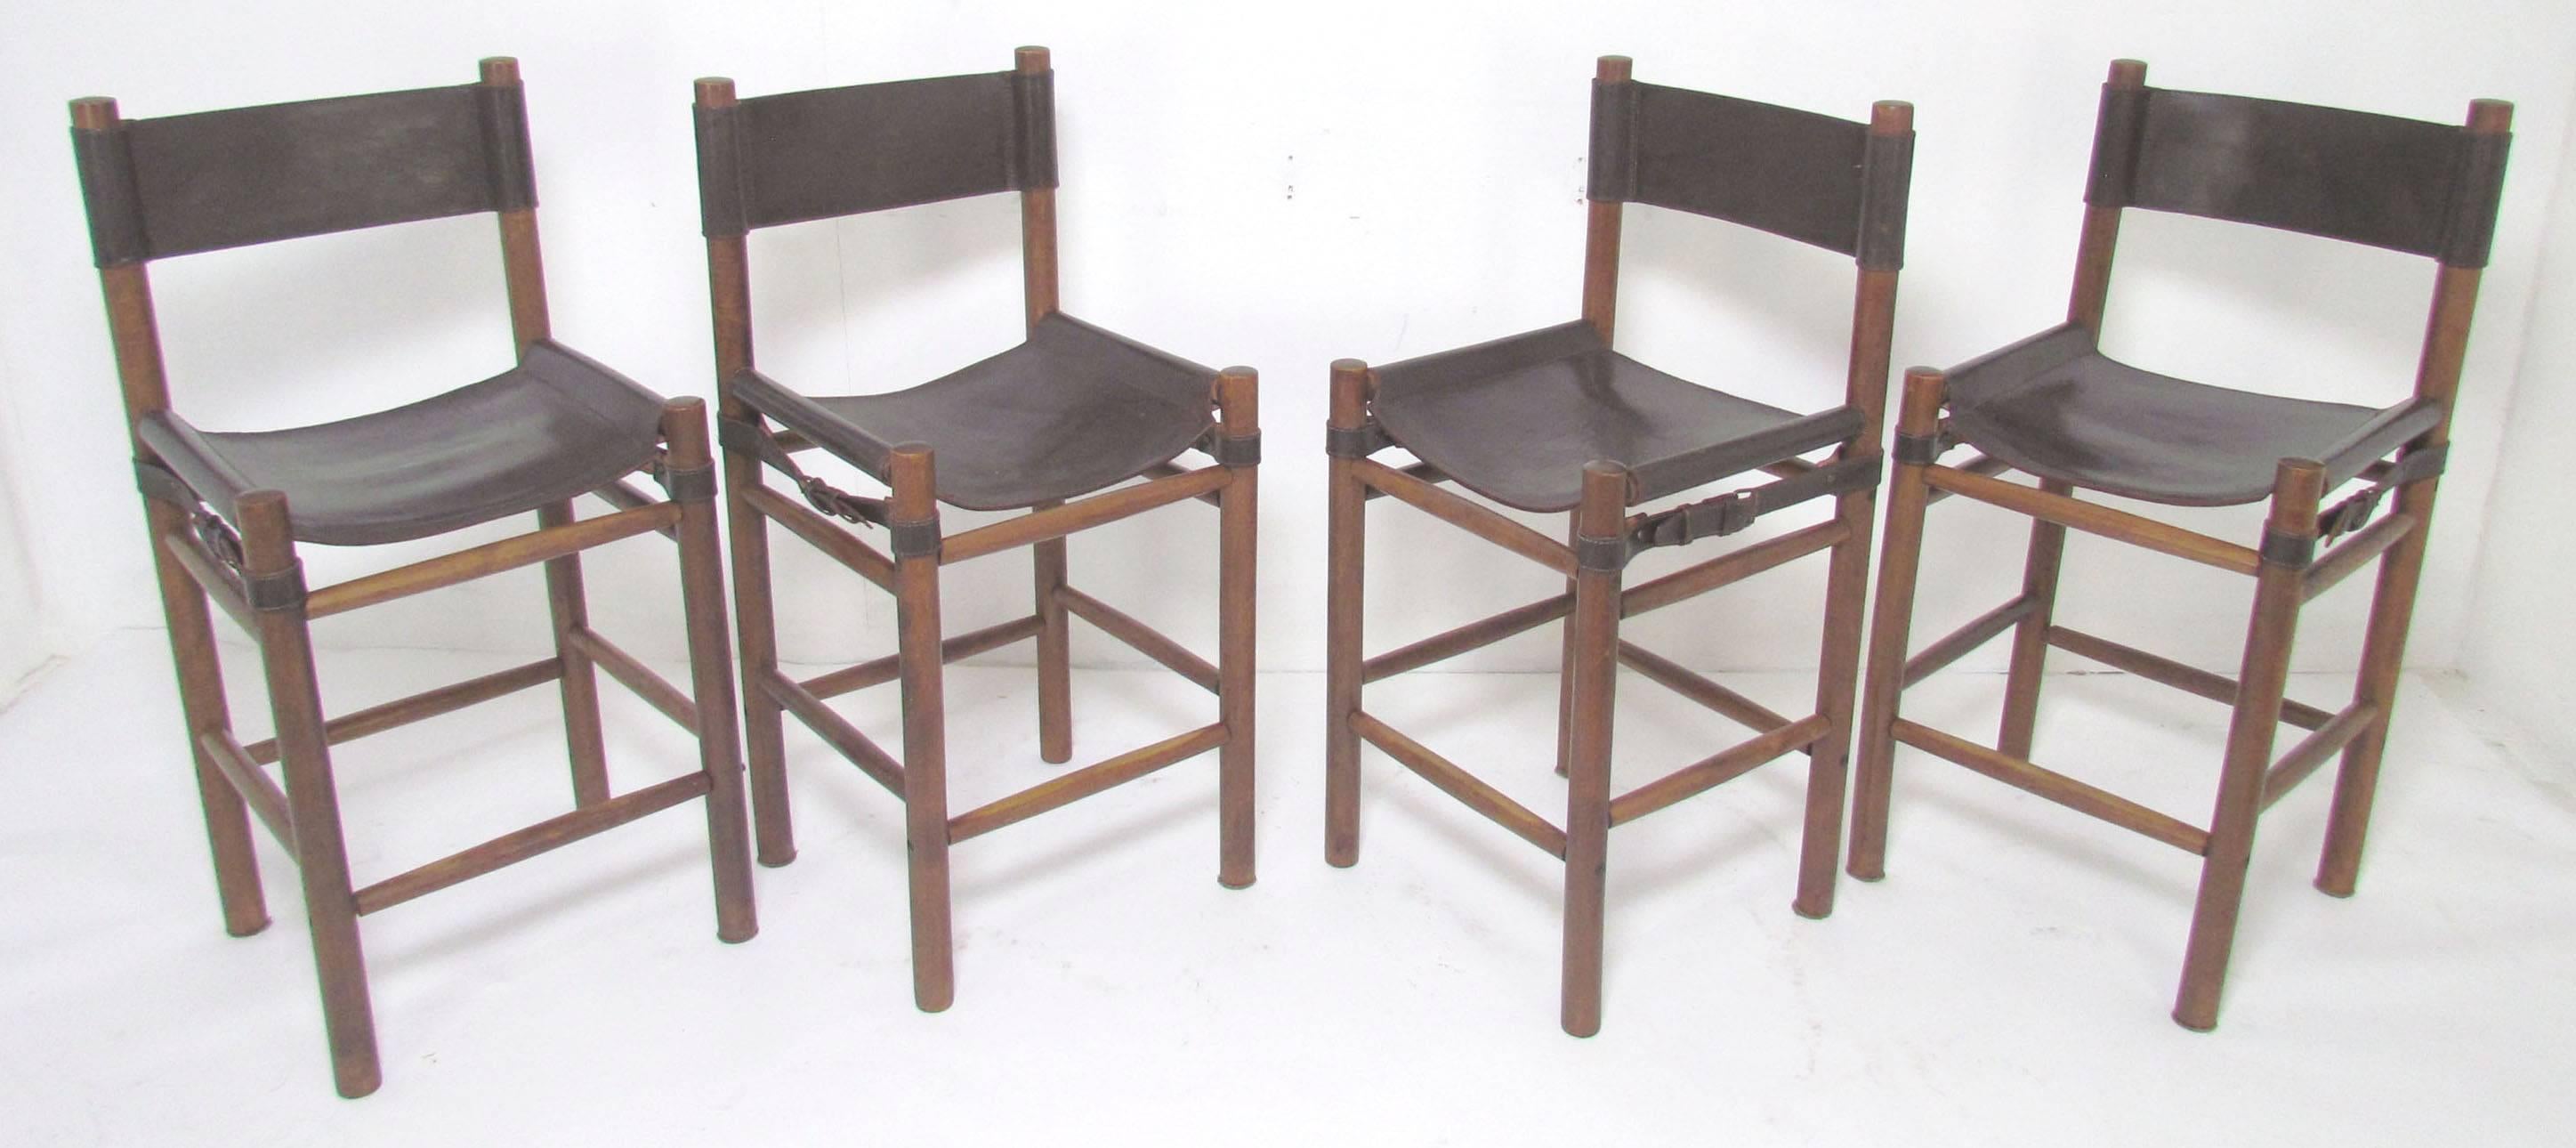 Set of four Safari style bar stools with leather sling upholstery and hardwood frames, made in Argentina, circa 1970s.